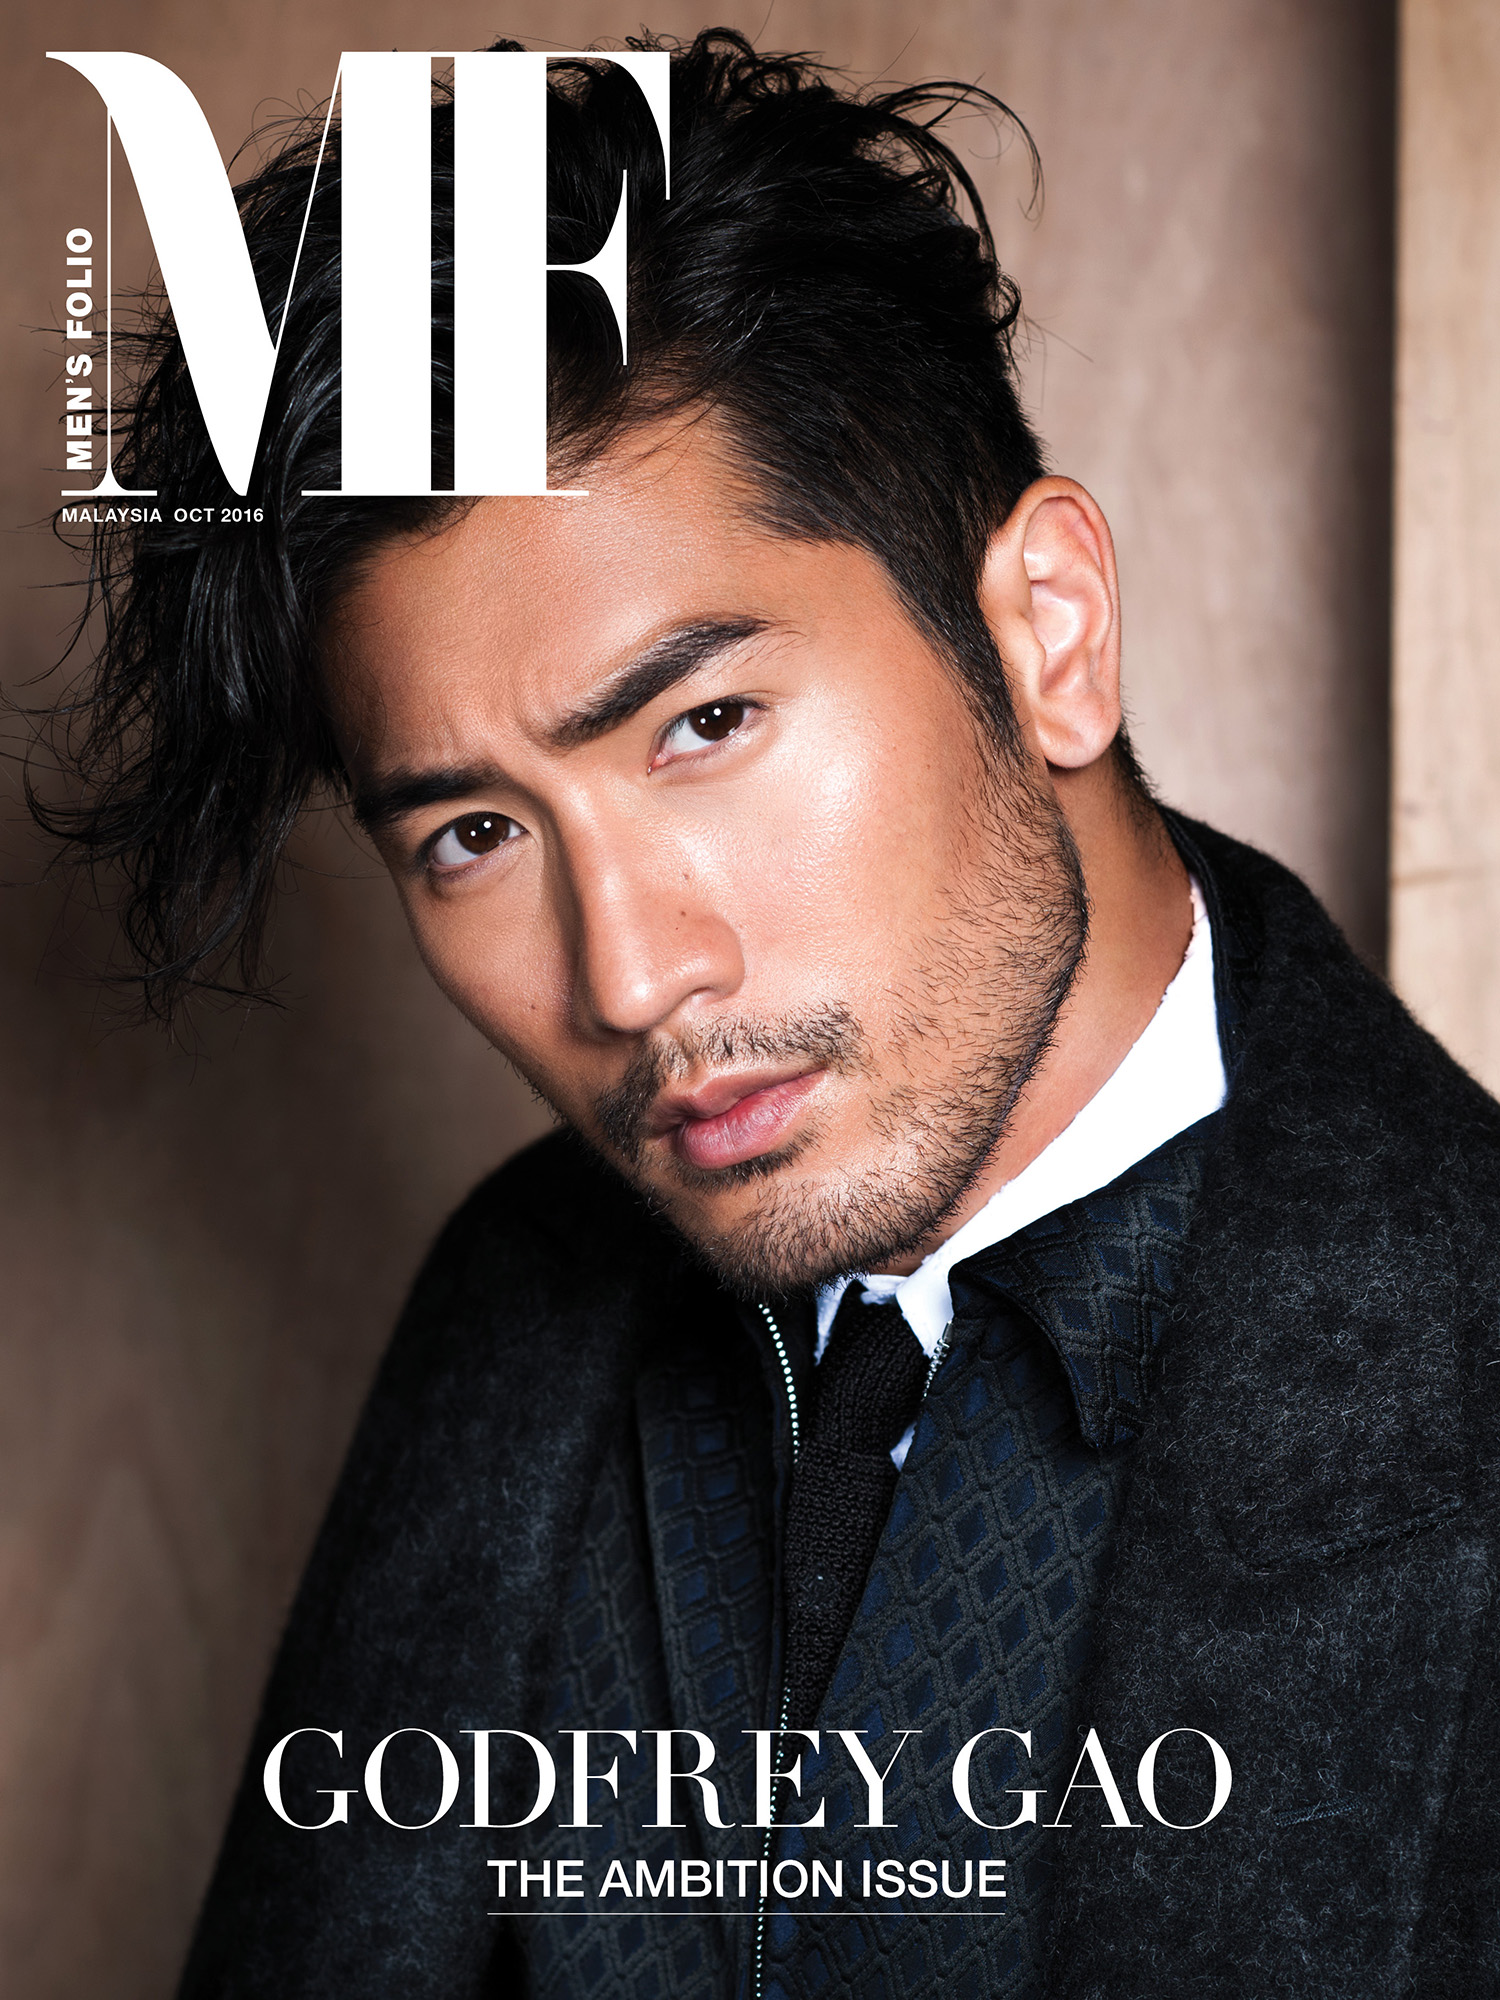 Exclusive Q A 5 Minutes With Godfrey Gao The Hollywood Up And Comer Men S Folio Malaysia